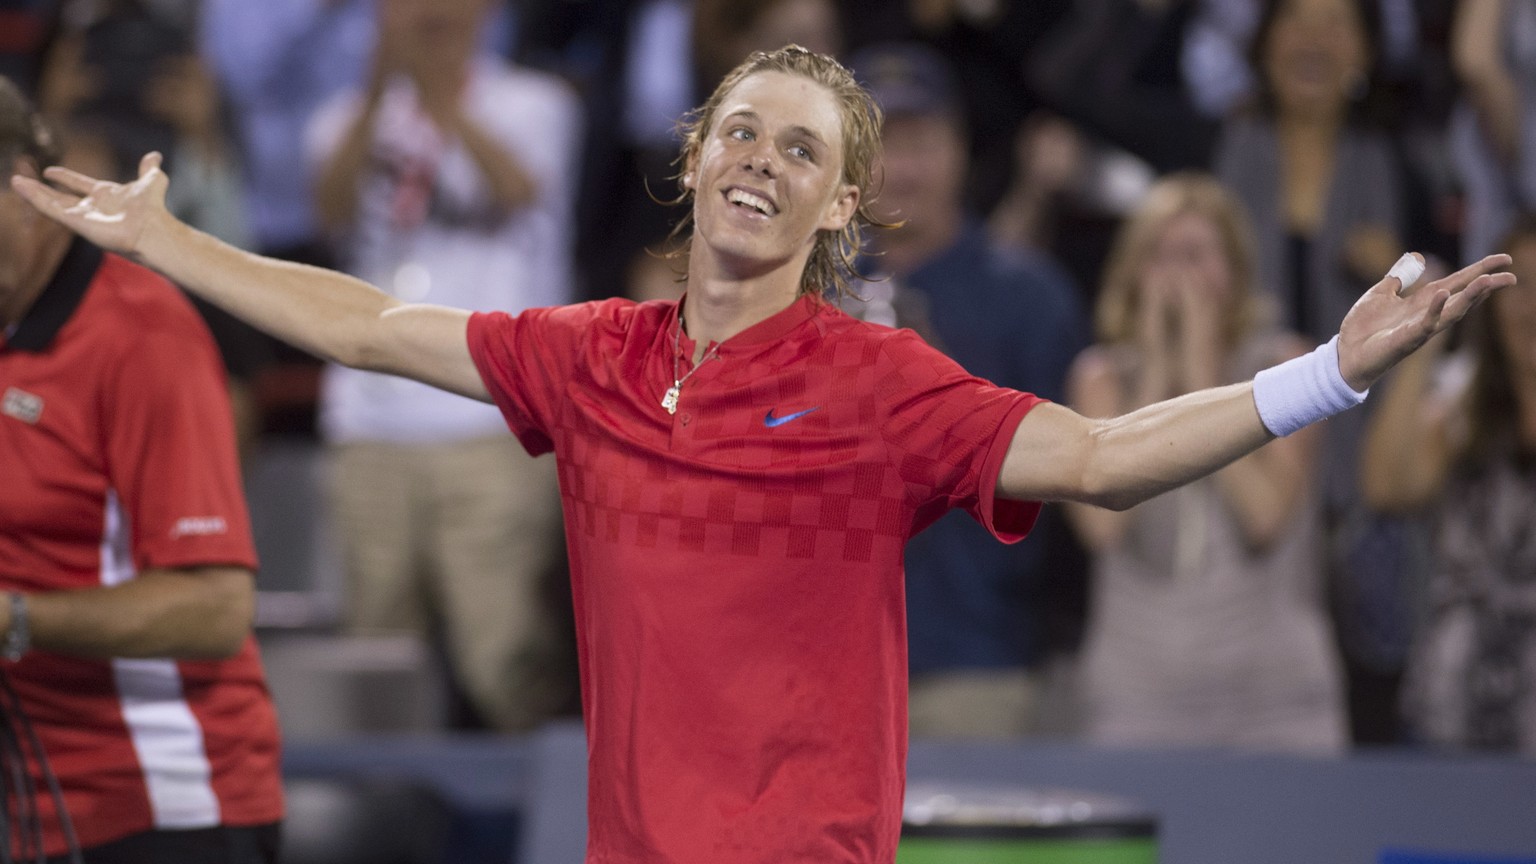 Denis Shapovalov, of Canada, salutes the crowd after defeating Rafael Nadal, of Spain, 3-6, 6-4, 7-6 (4) at the Rogers Cup tennis tournament Thursday, Aug. 10, 2017, in Montreal. (Paul Chiasson/The Ca ...